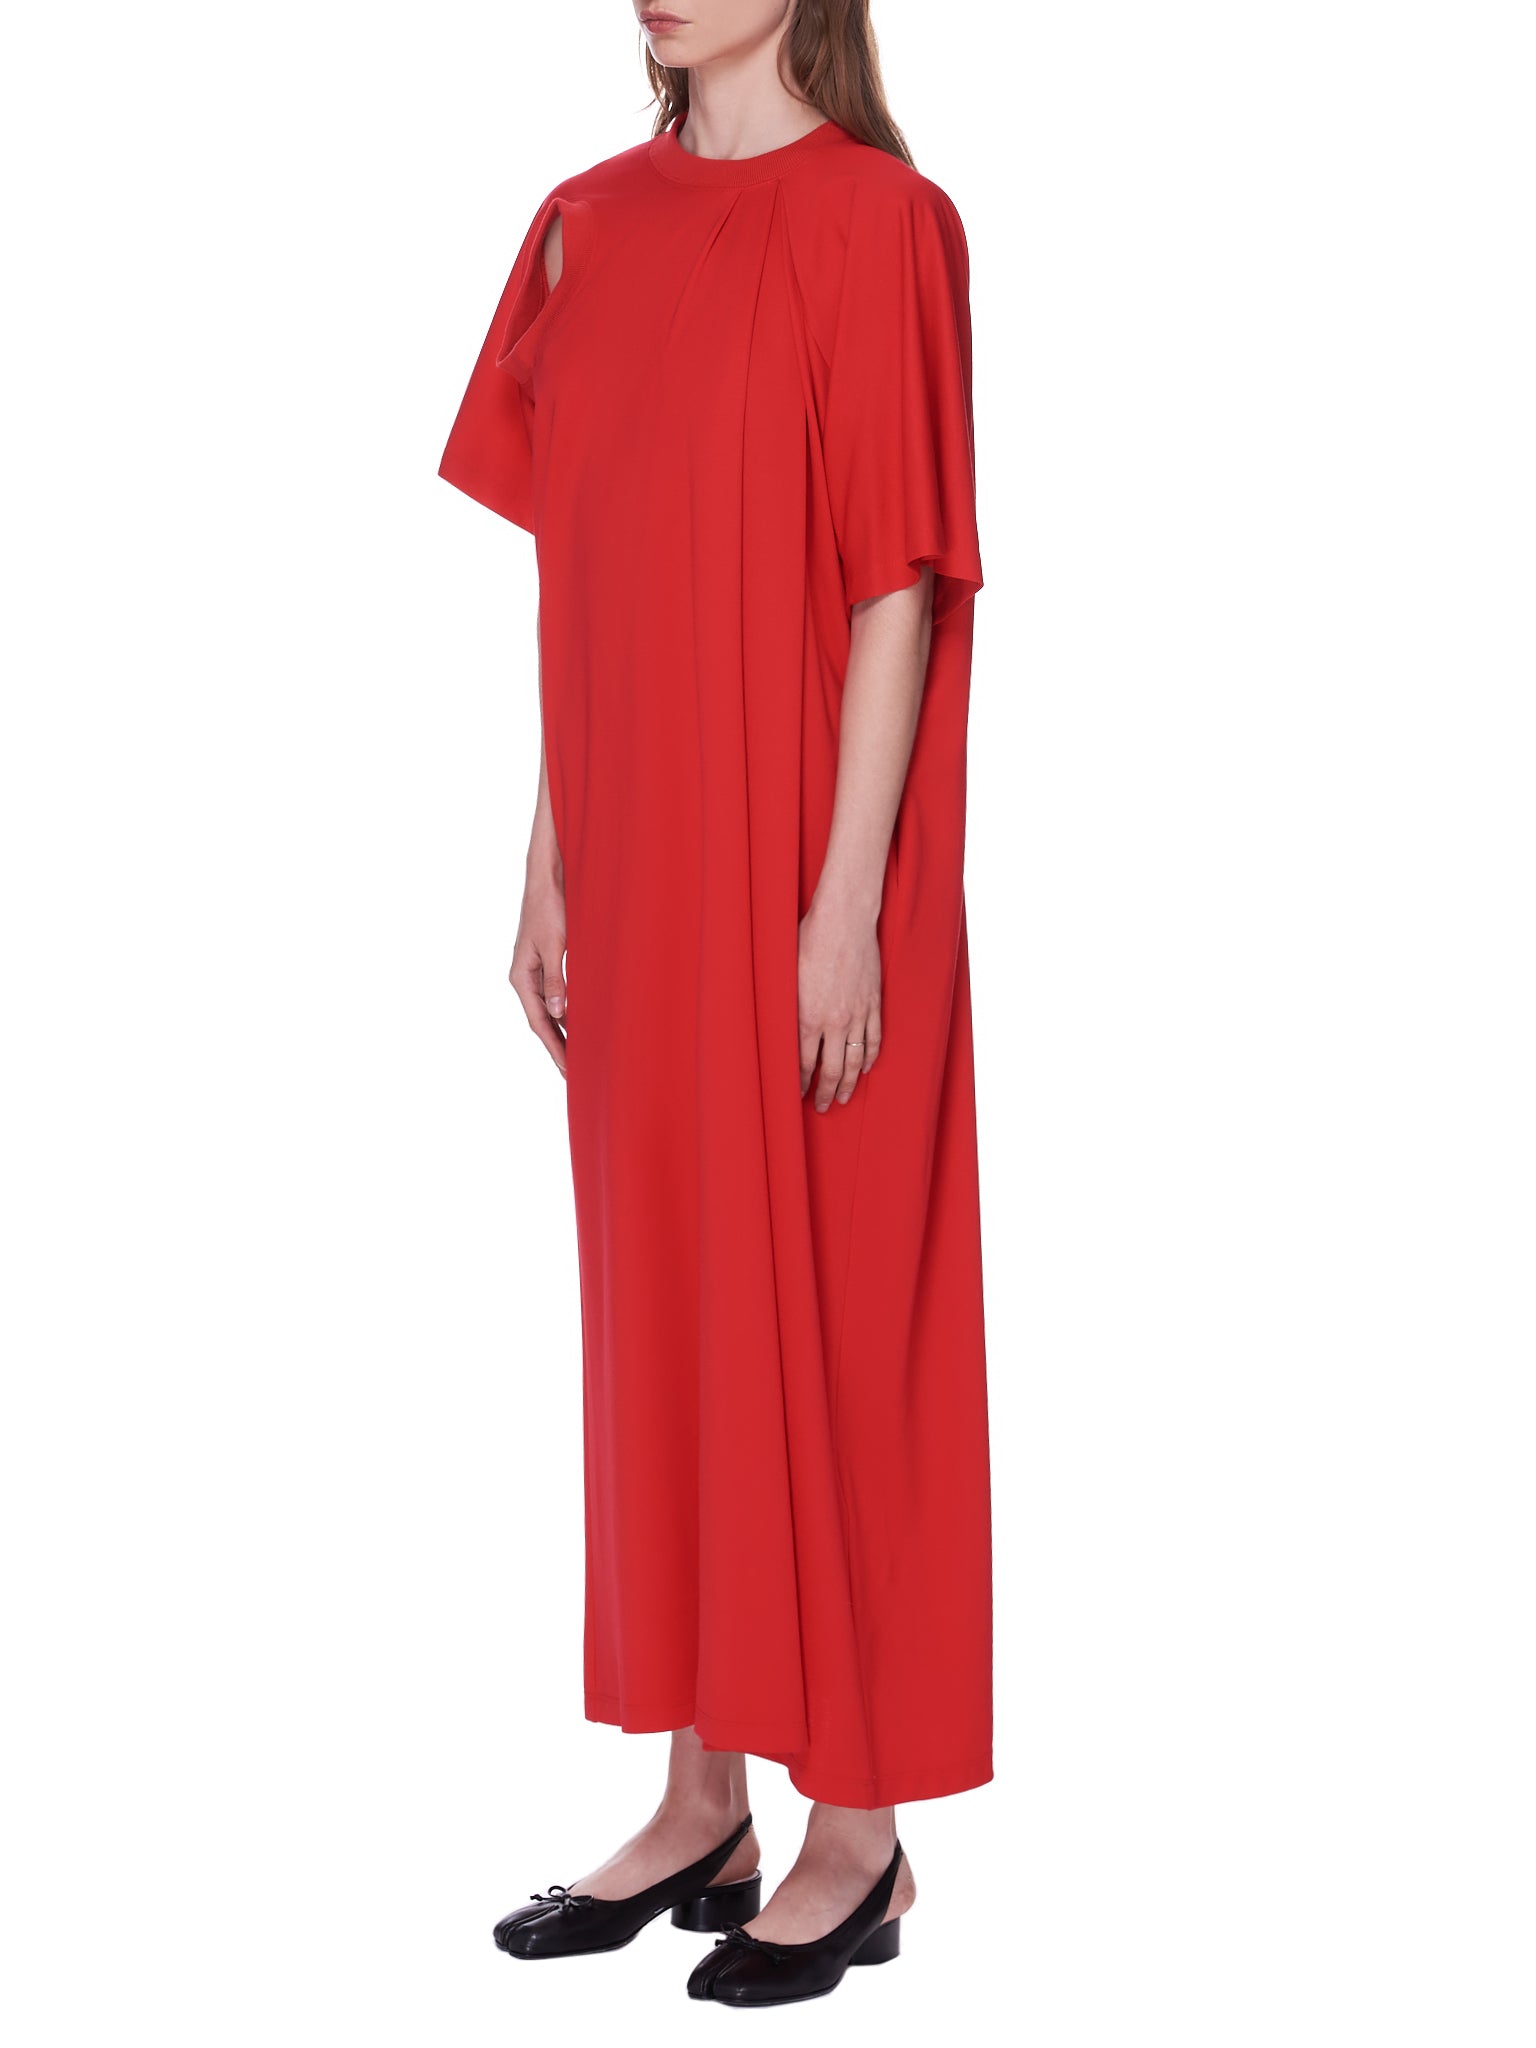 Vented T-Shirt Dress (MB-35-BOLD-RED)